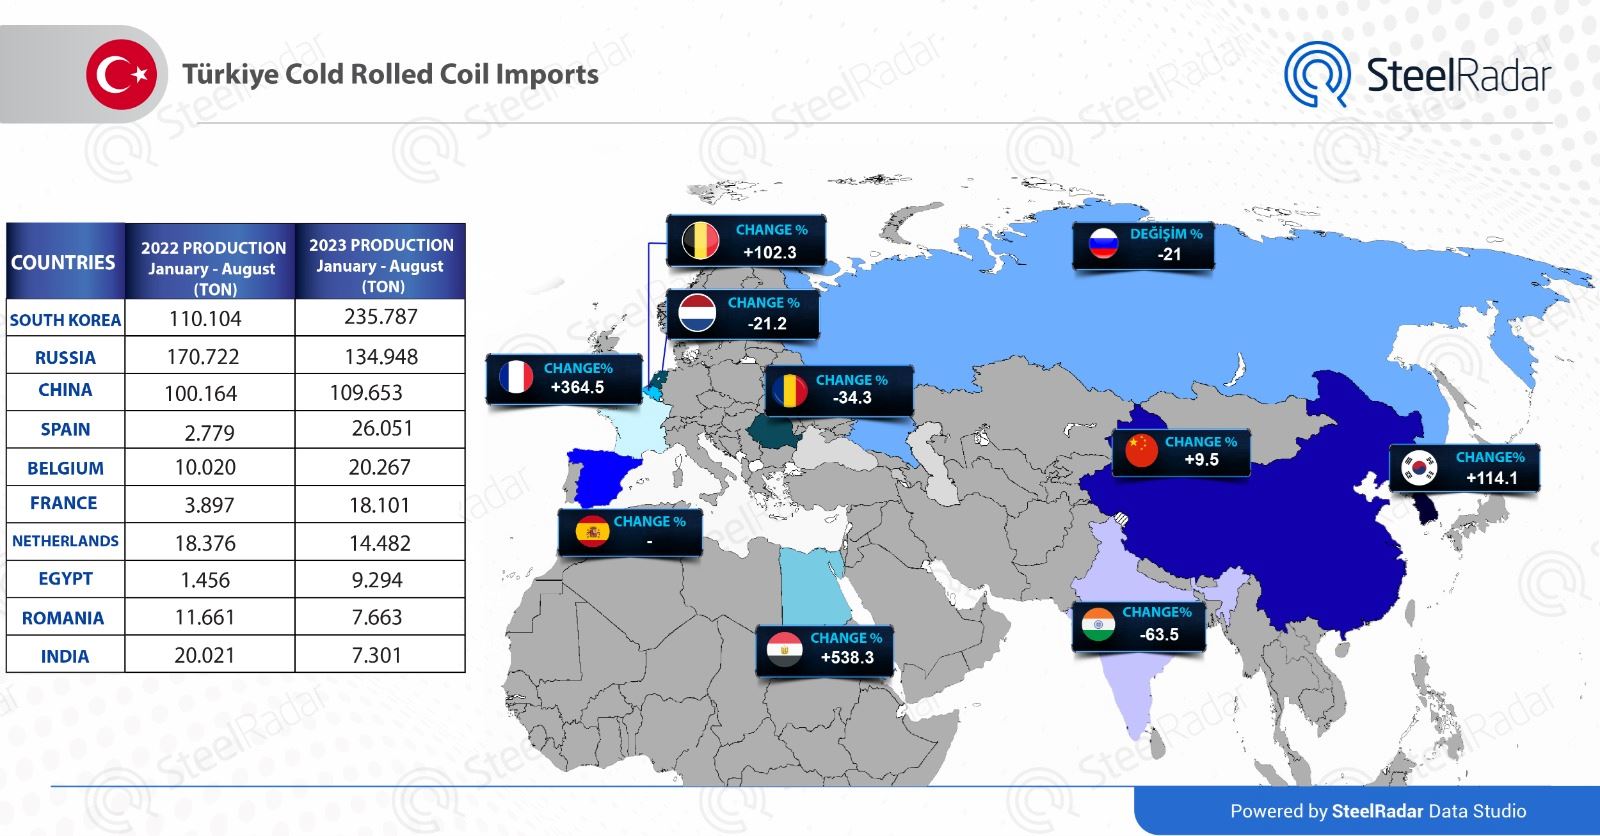 Turkey's cold rolled coil product imports surge in 2023